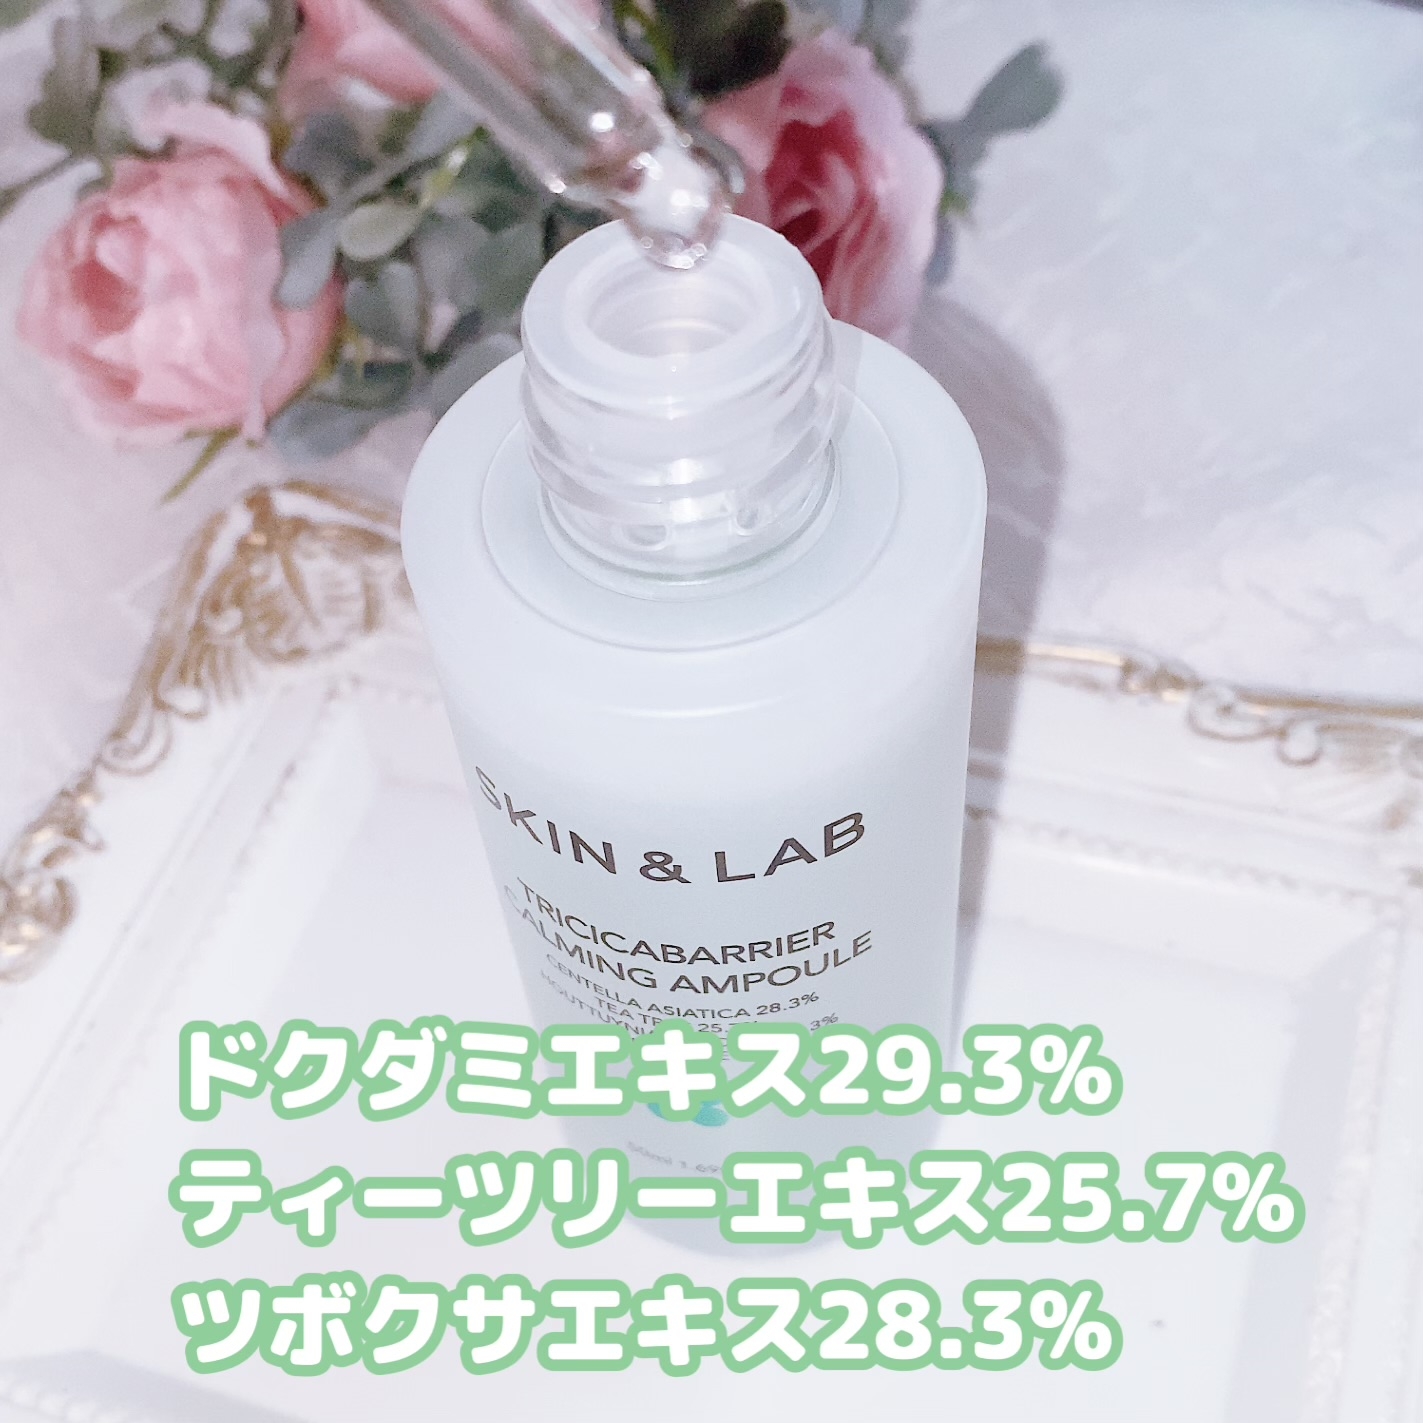 SKIN&LABTRICICABARRIER CALMING AMPOULEを使った珈琲豆♡さんのクチコミ画像1